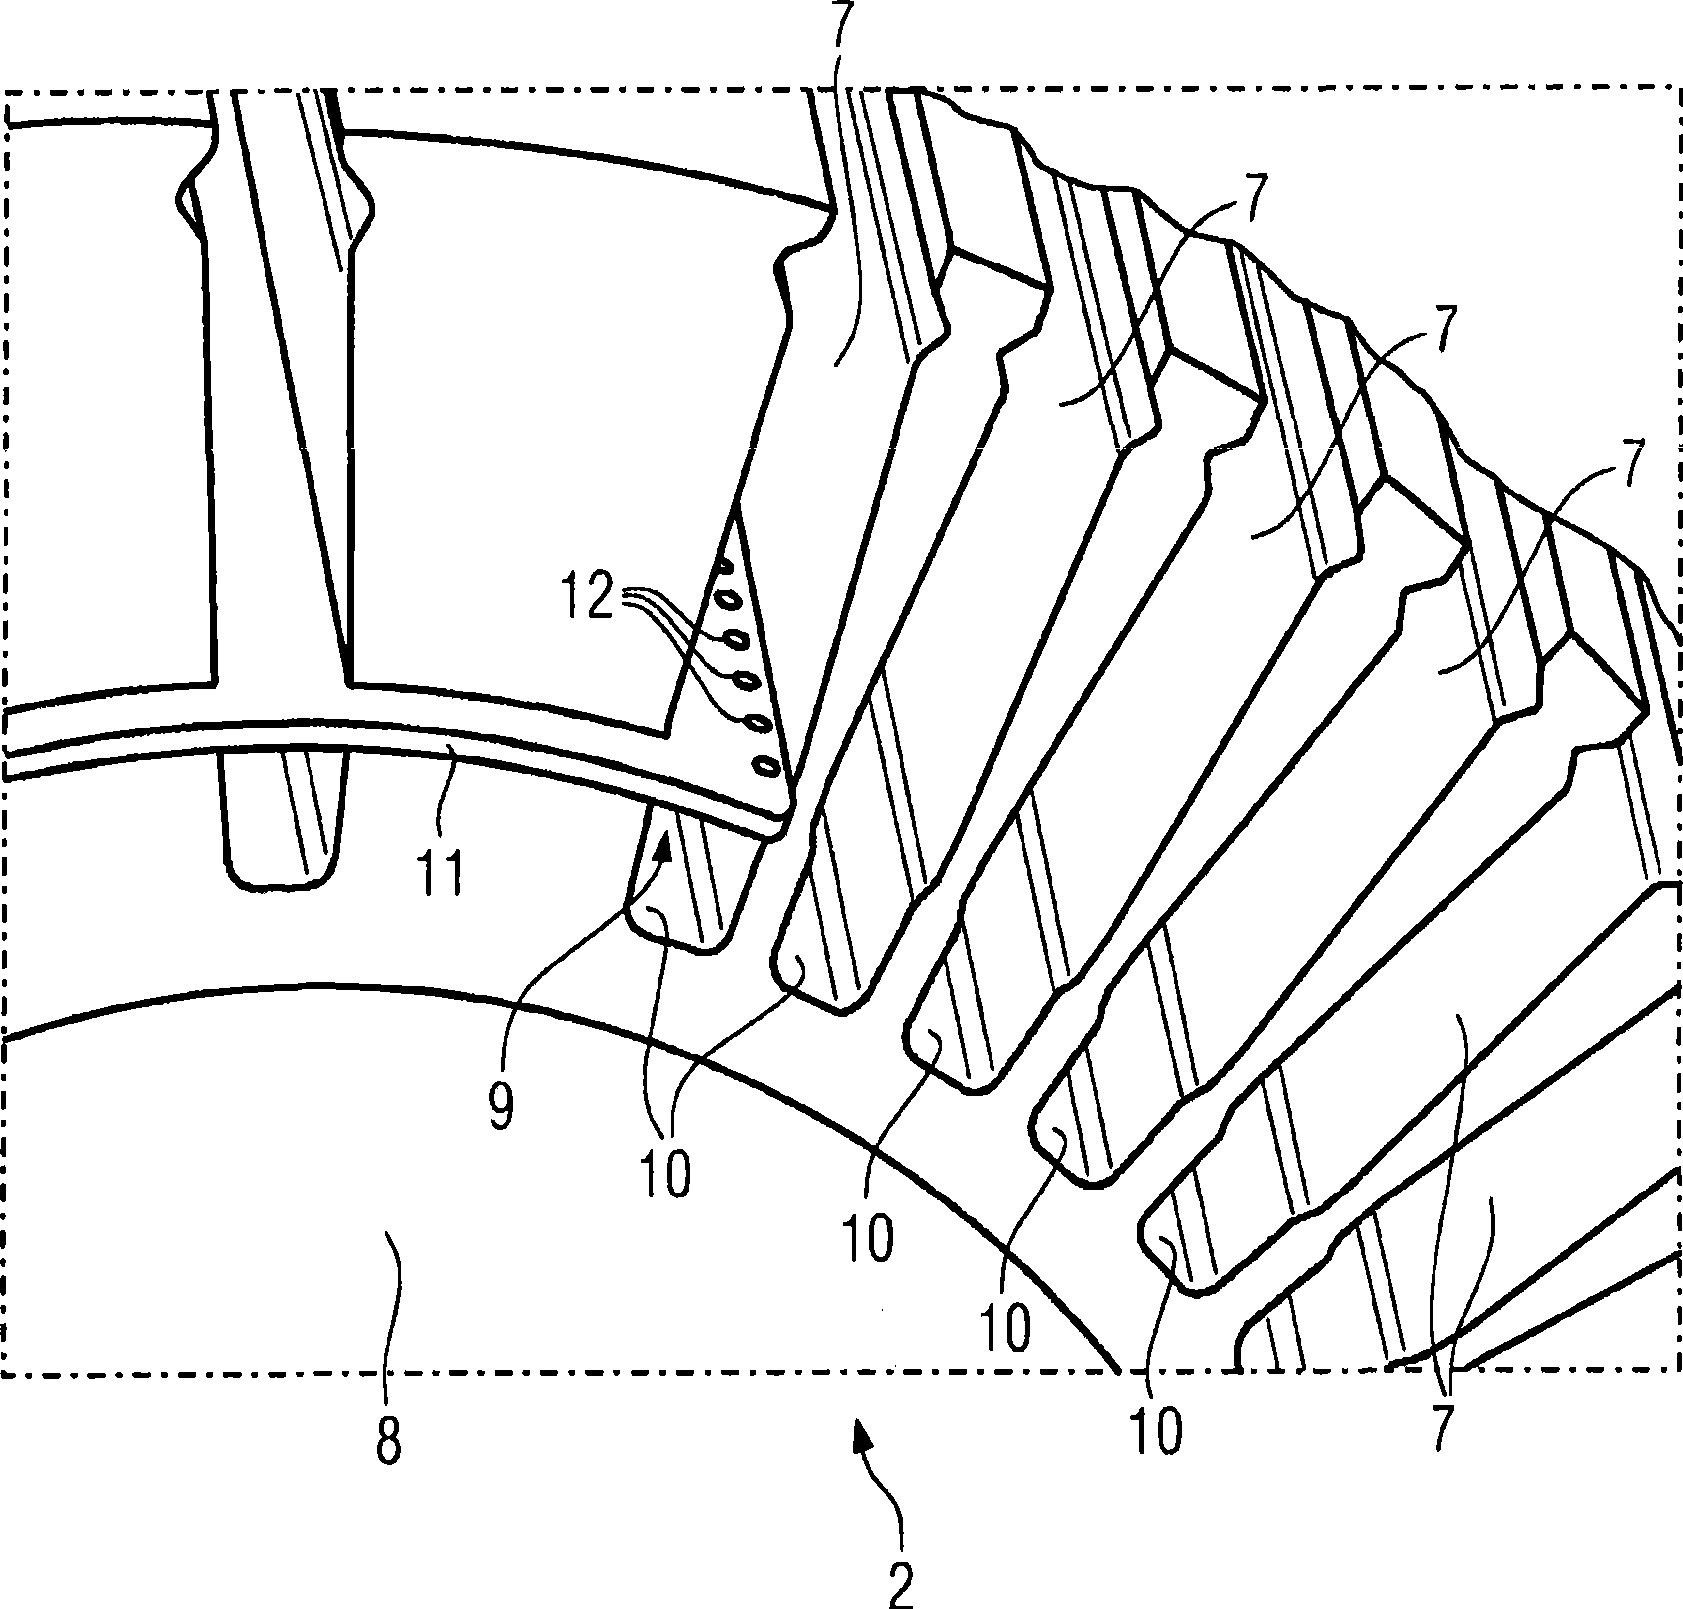 Rotor cooling for a dynamoelectrical machine